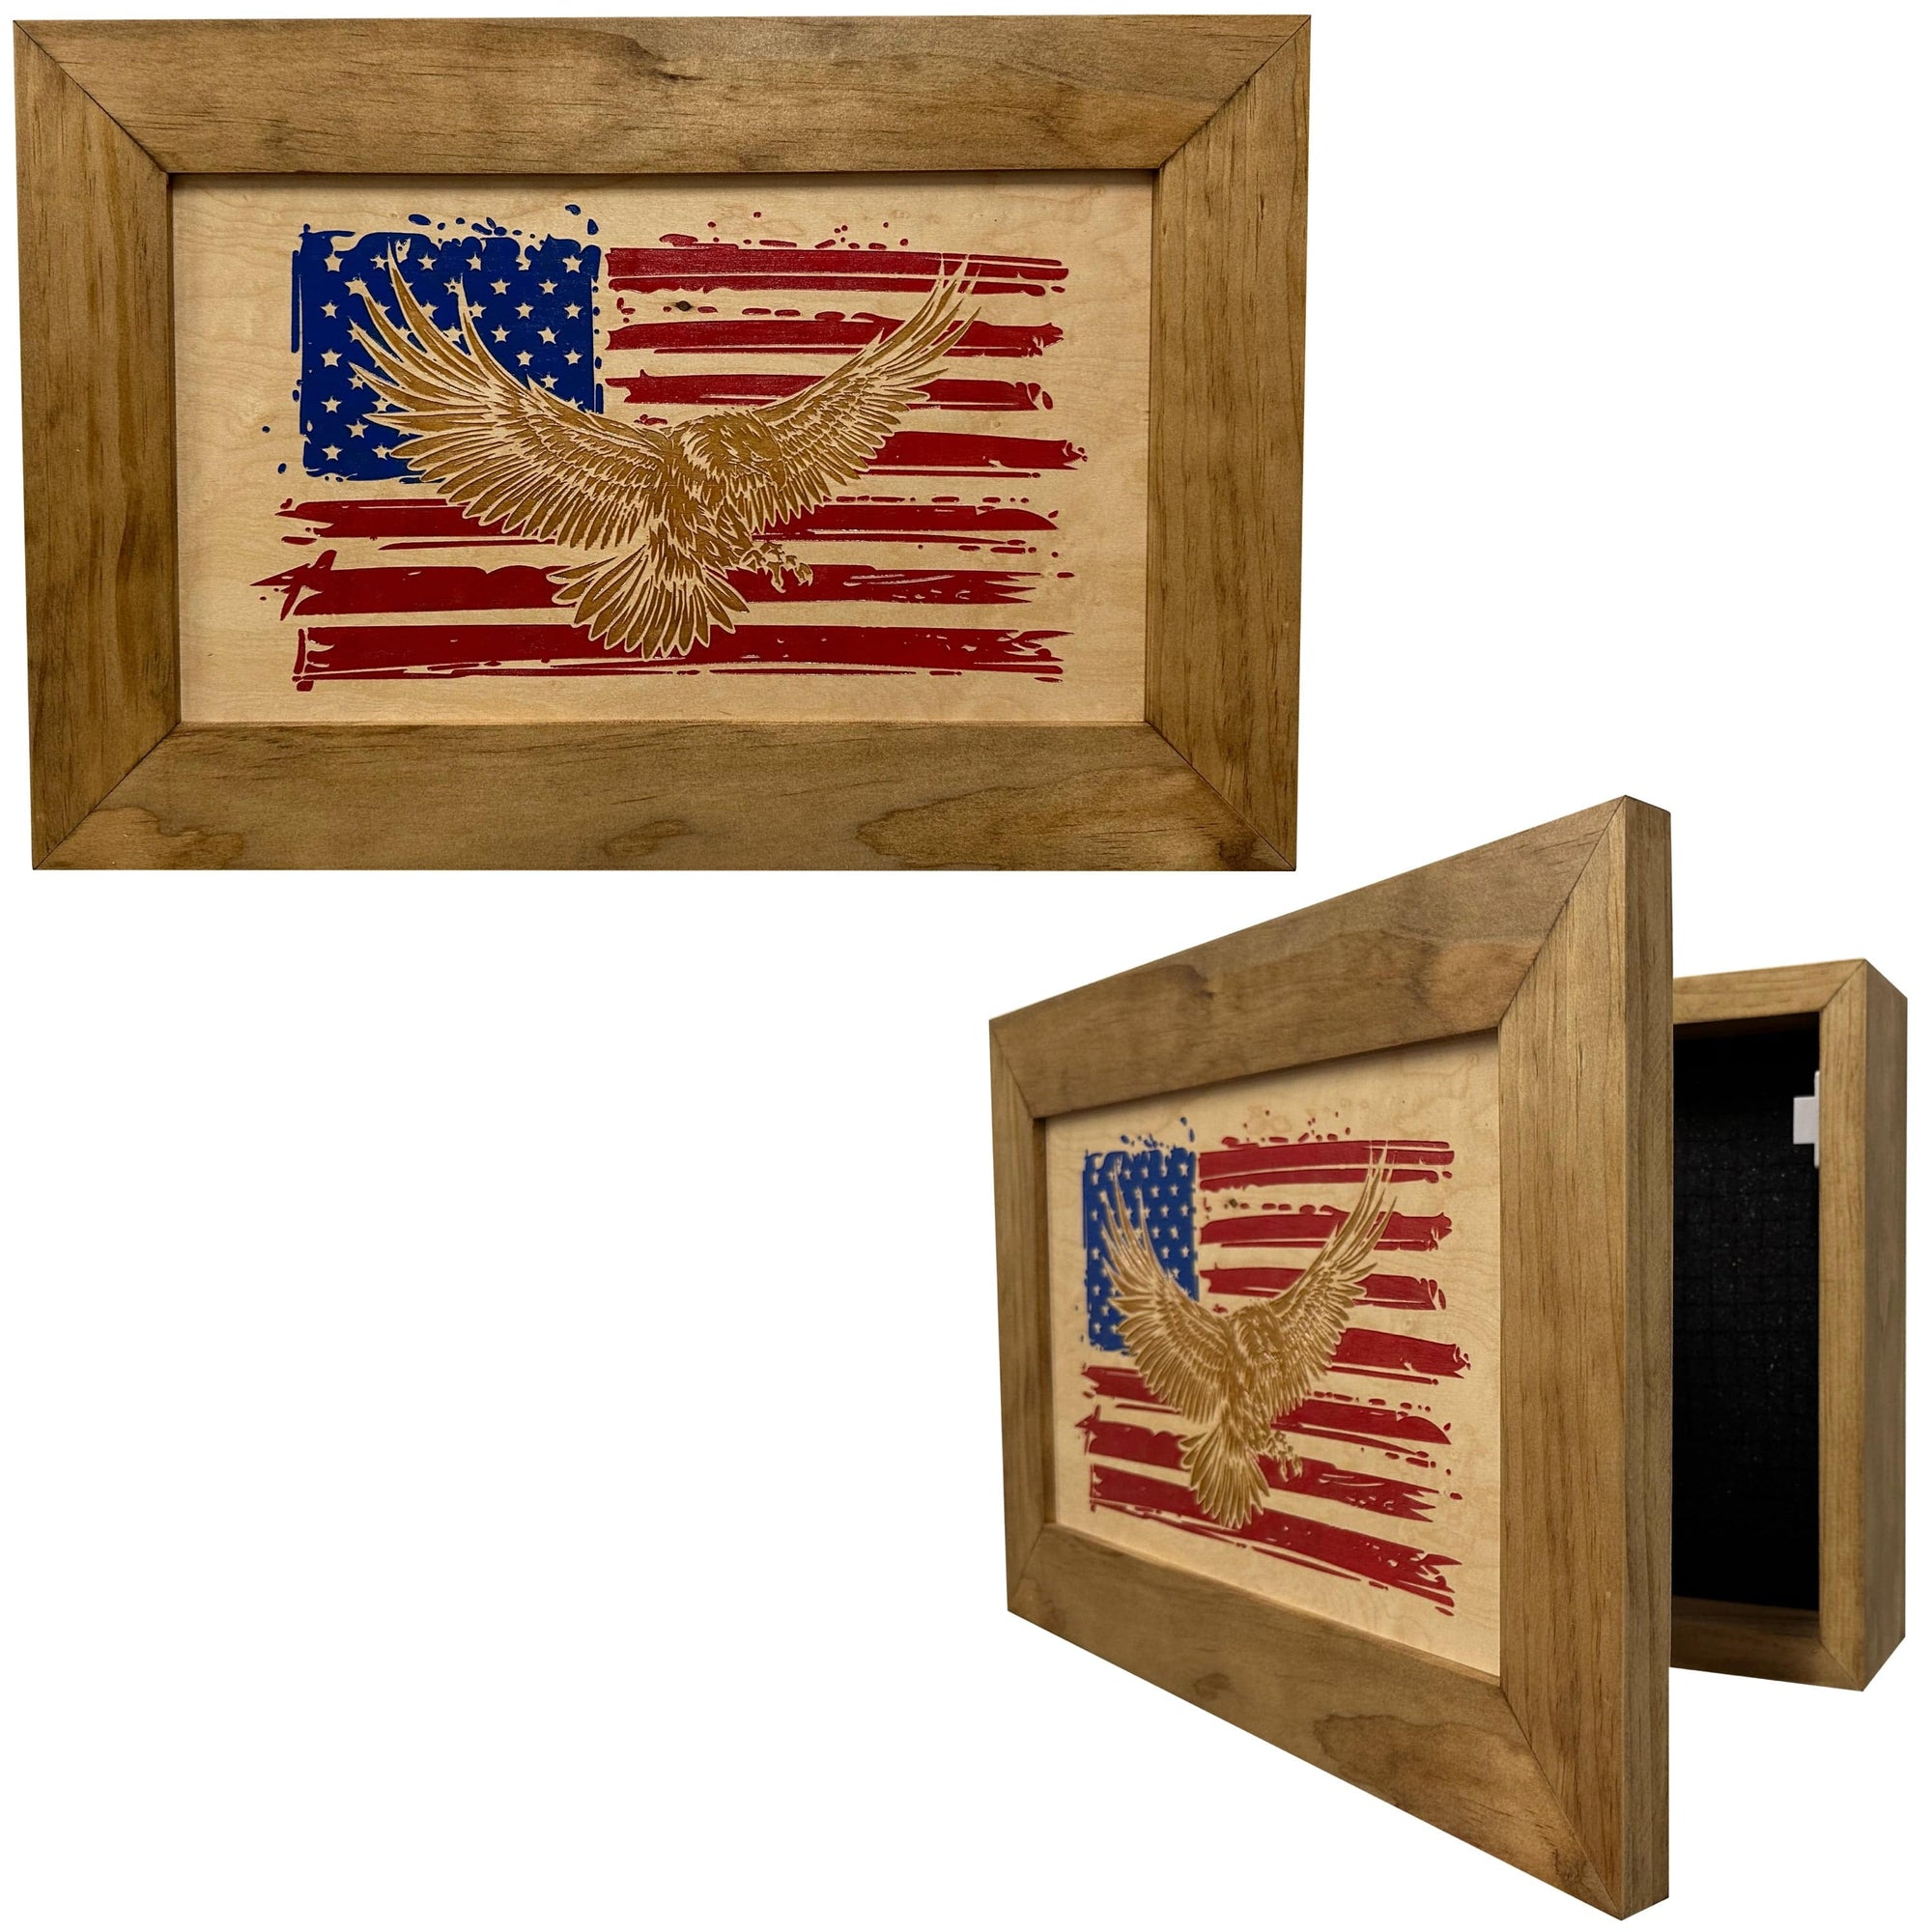 Bald Eagle & American Flag Patriotic Decorative Wall-Mounted Secure Gun Cabinet Armadillo Safe and Vault